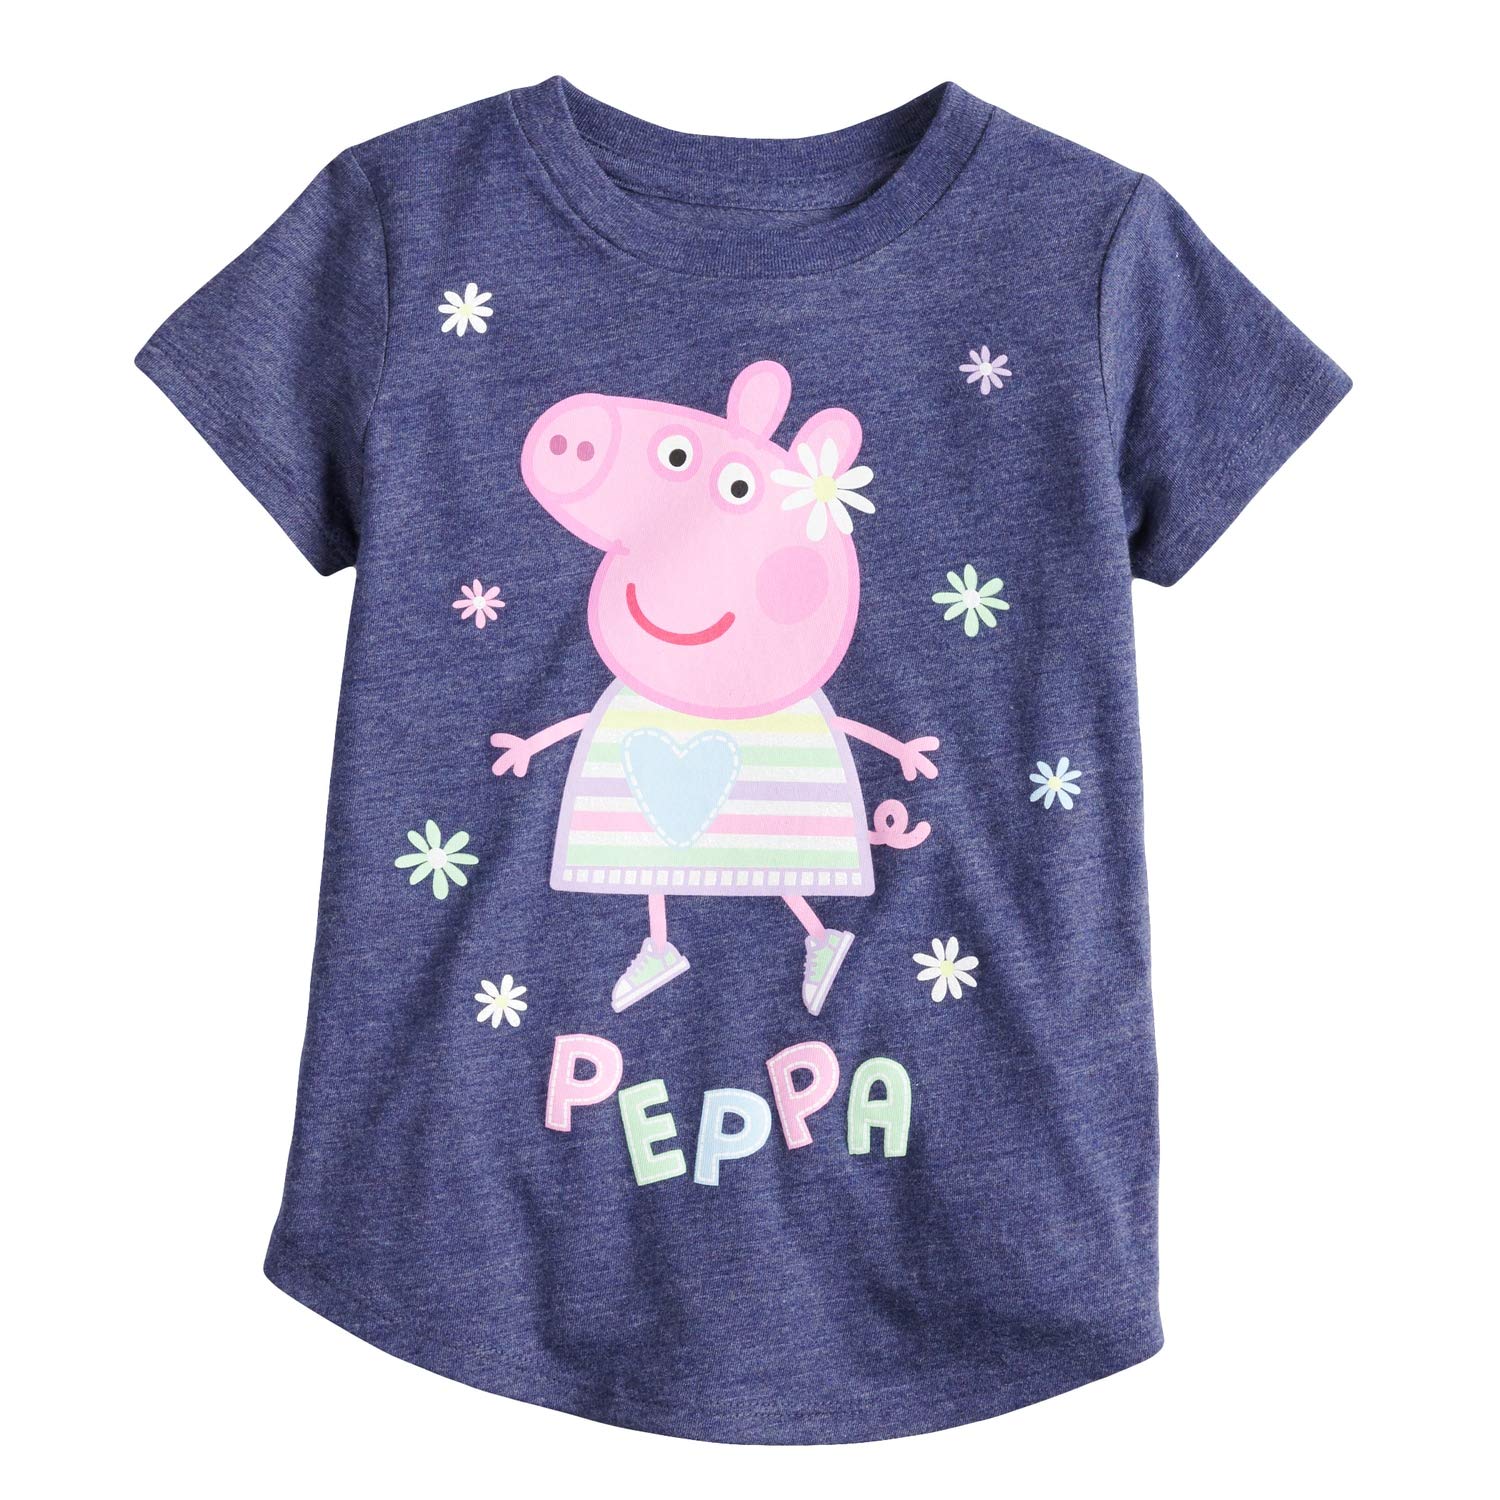 Book Cover Jumping Beans Toddler Girls 2T-5T Peppa Pig Glitter Graphic Tee 3T Peacoat Navy